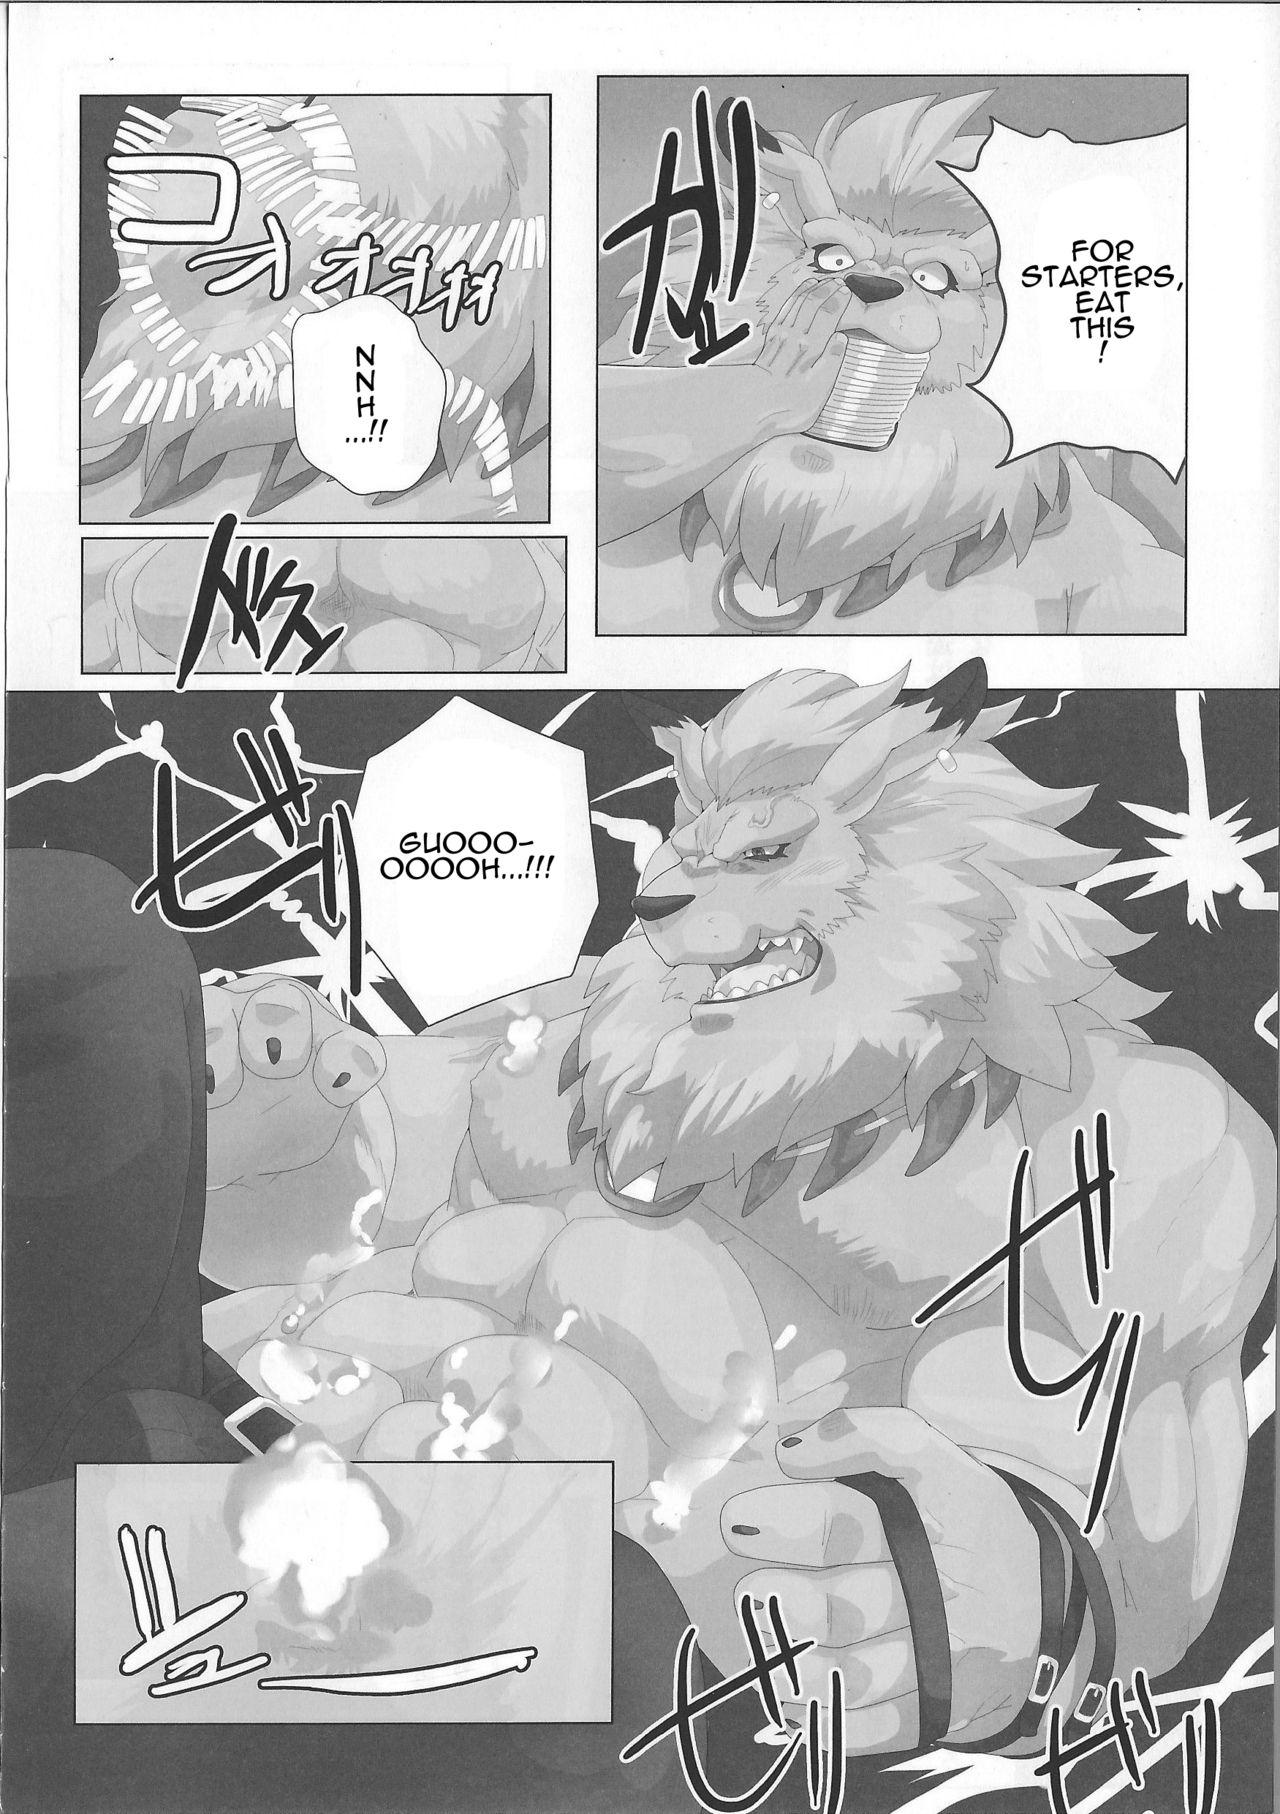 Teen Blowjob [Debirobu] For the Lion-Man Type Electric Life Form to Overturn Fate - Leomon Doujin [ENG] - Digimon Cousin - Page 8